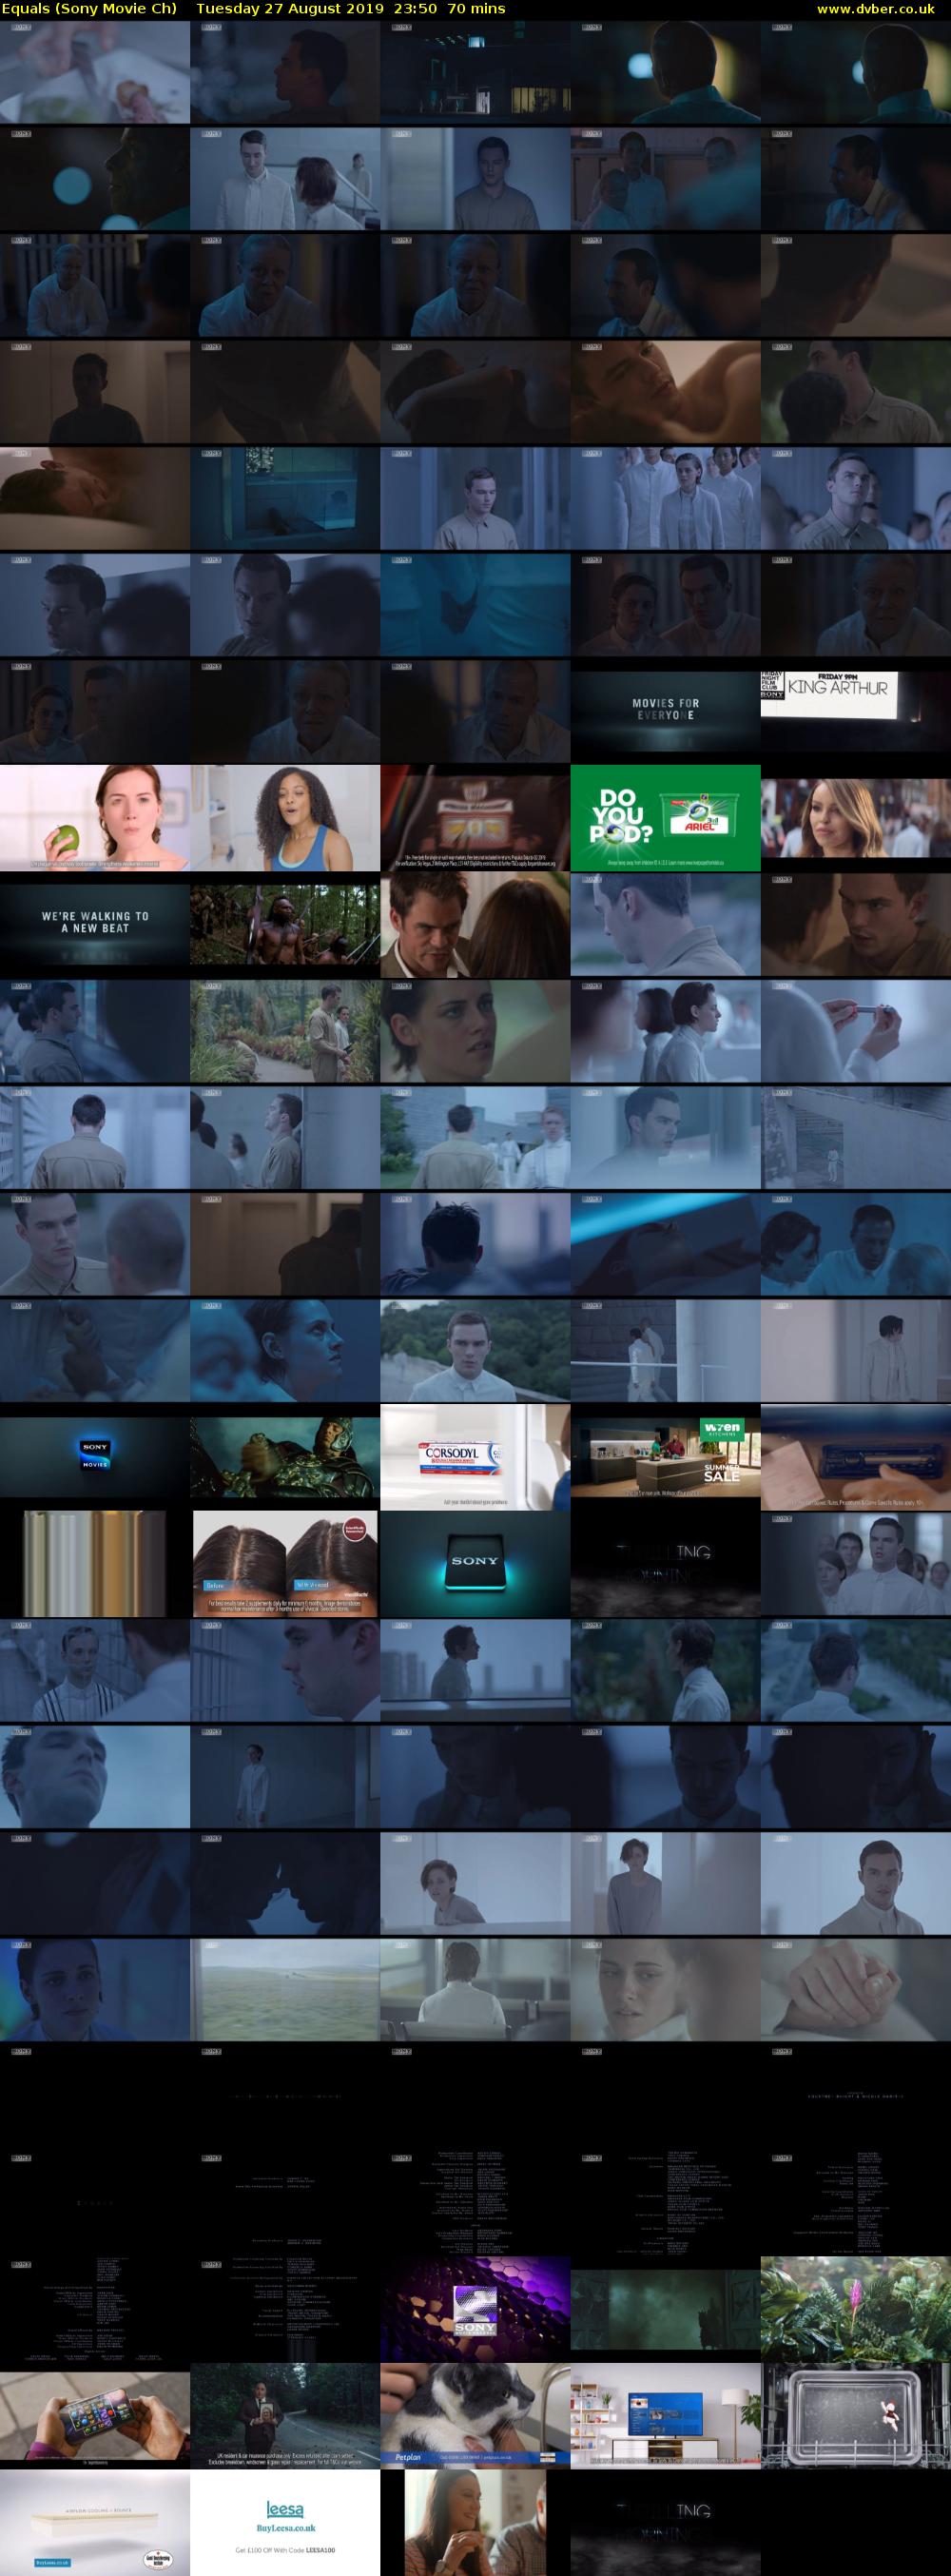 Equals (Sony Movie Ch) Tuesday 27 August 2019 23:50 - 01:00